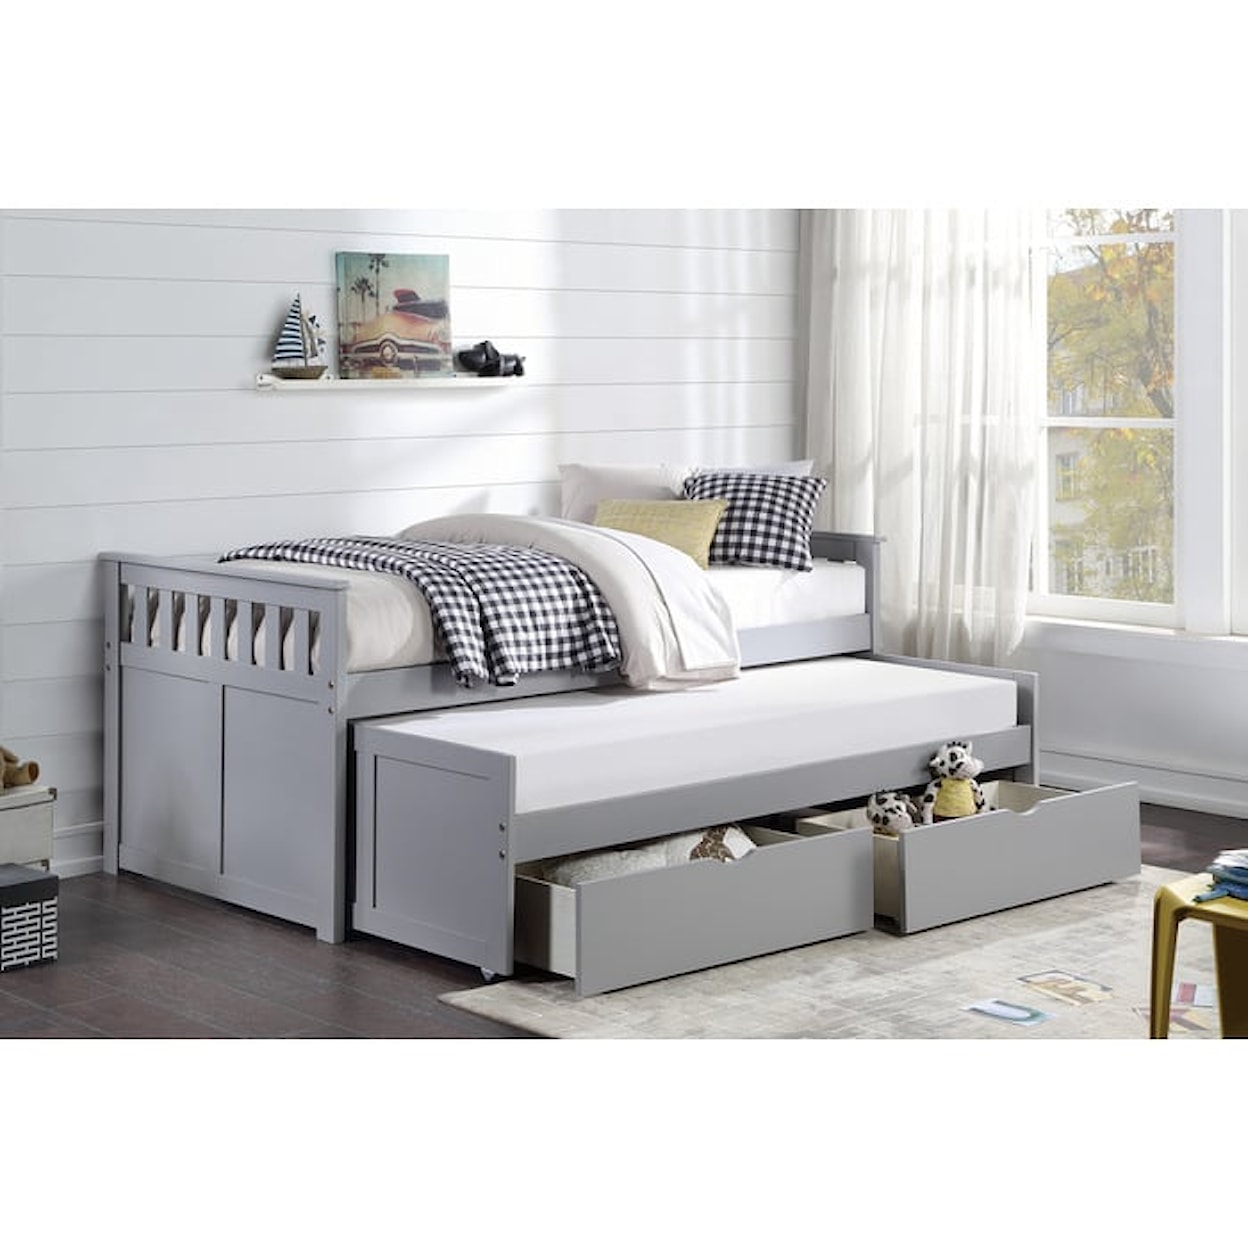 Homelegance Orion Twin over Twin Bed